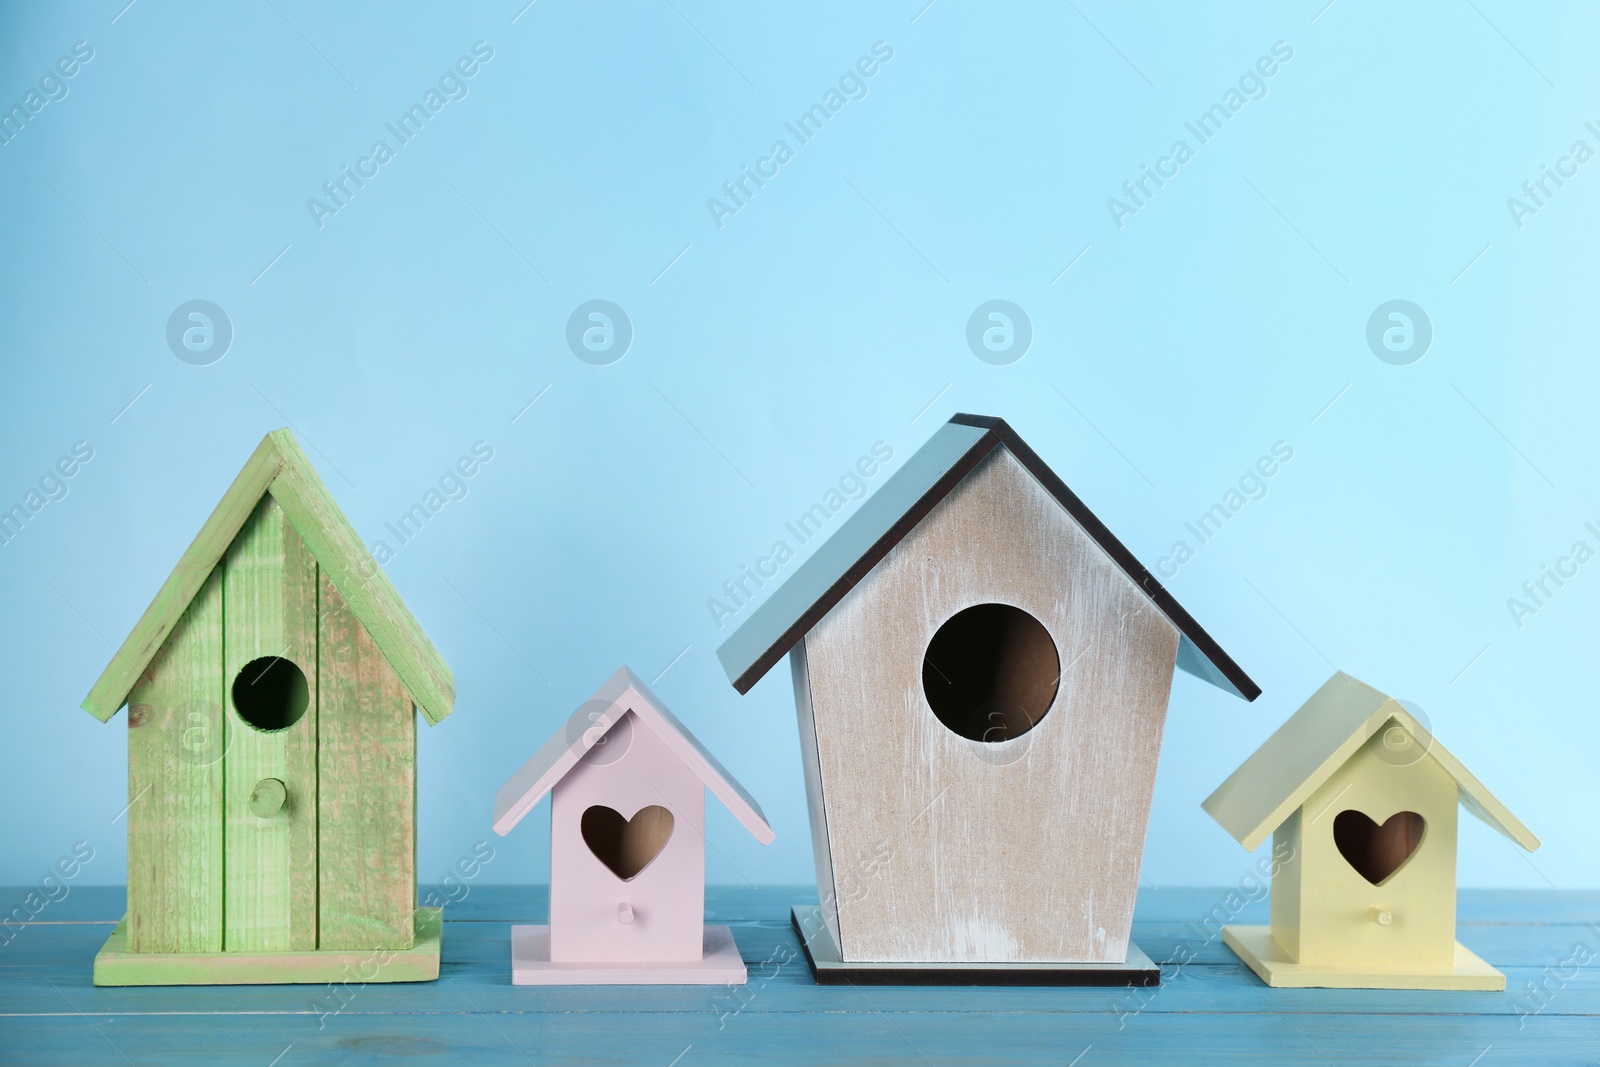 Photo of Collection of handmade bird houses on light blue wooden table